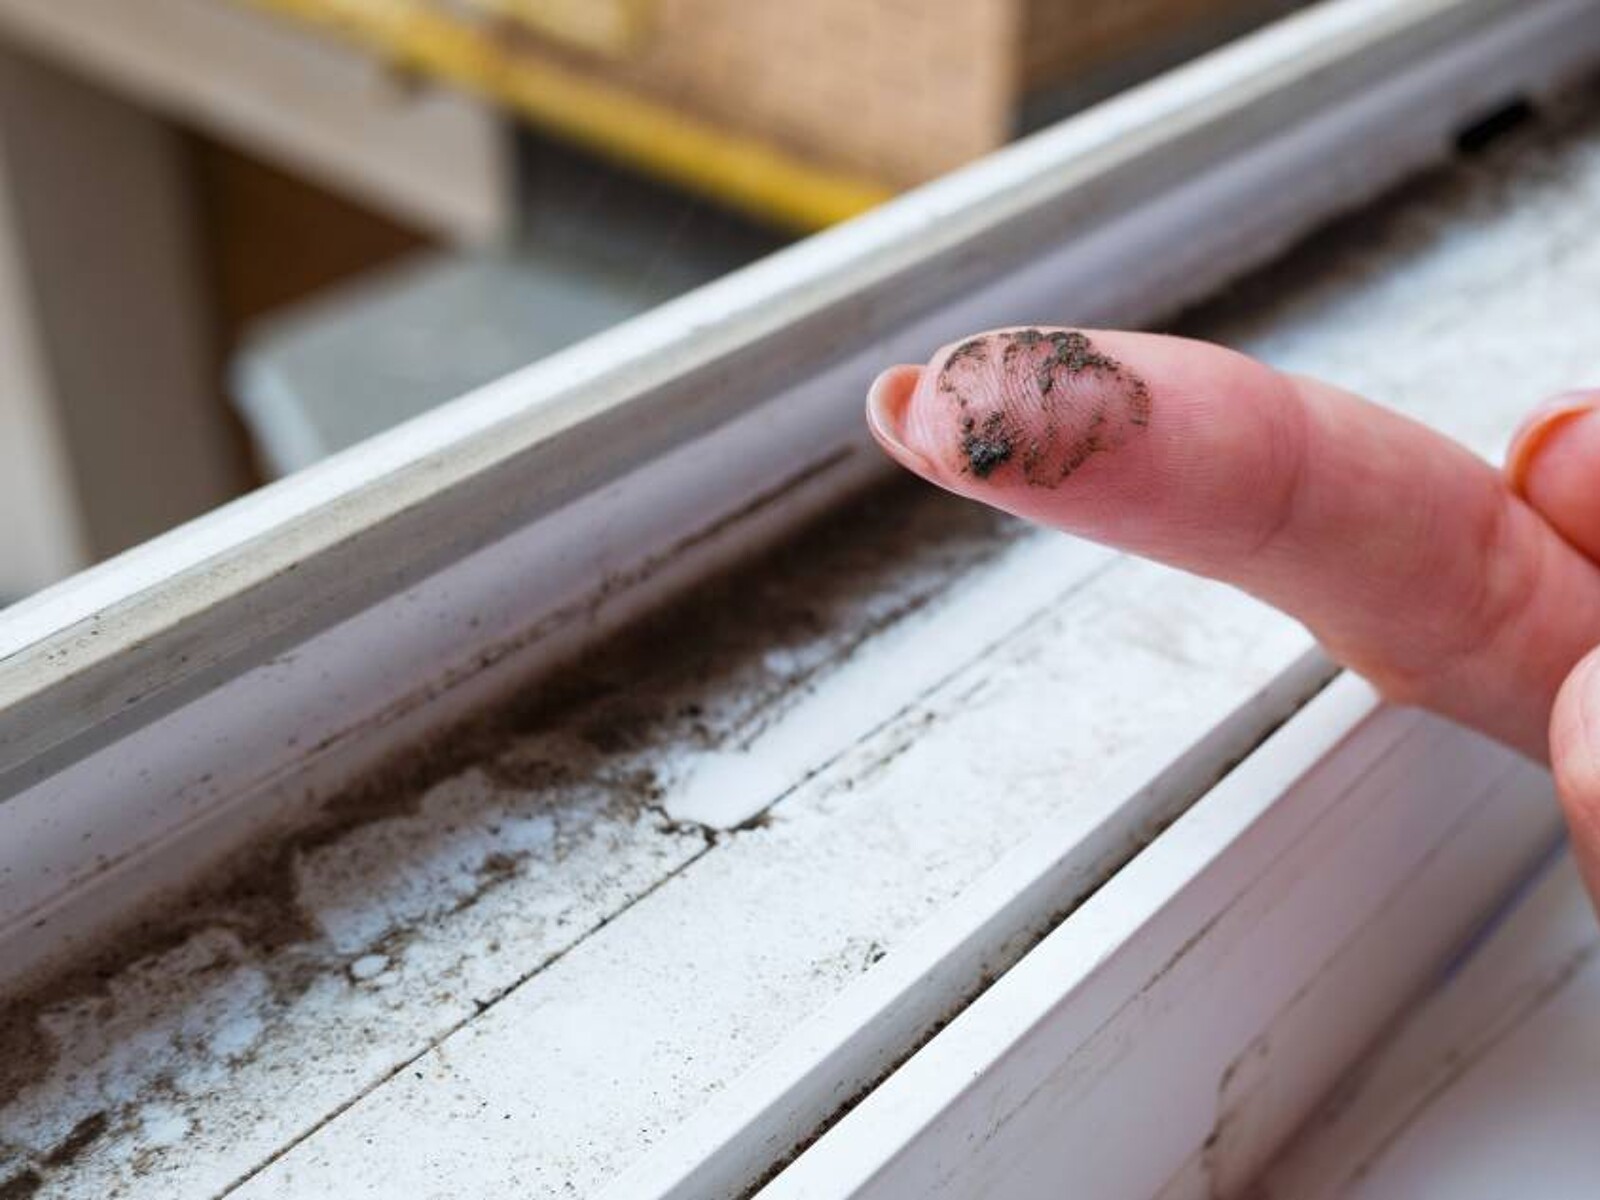 How to Clean Window Sills of Mold, Dirt, and Scuffs